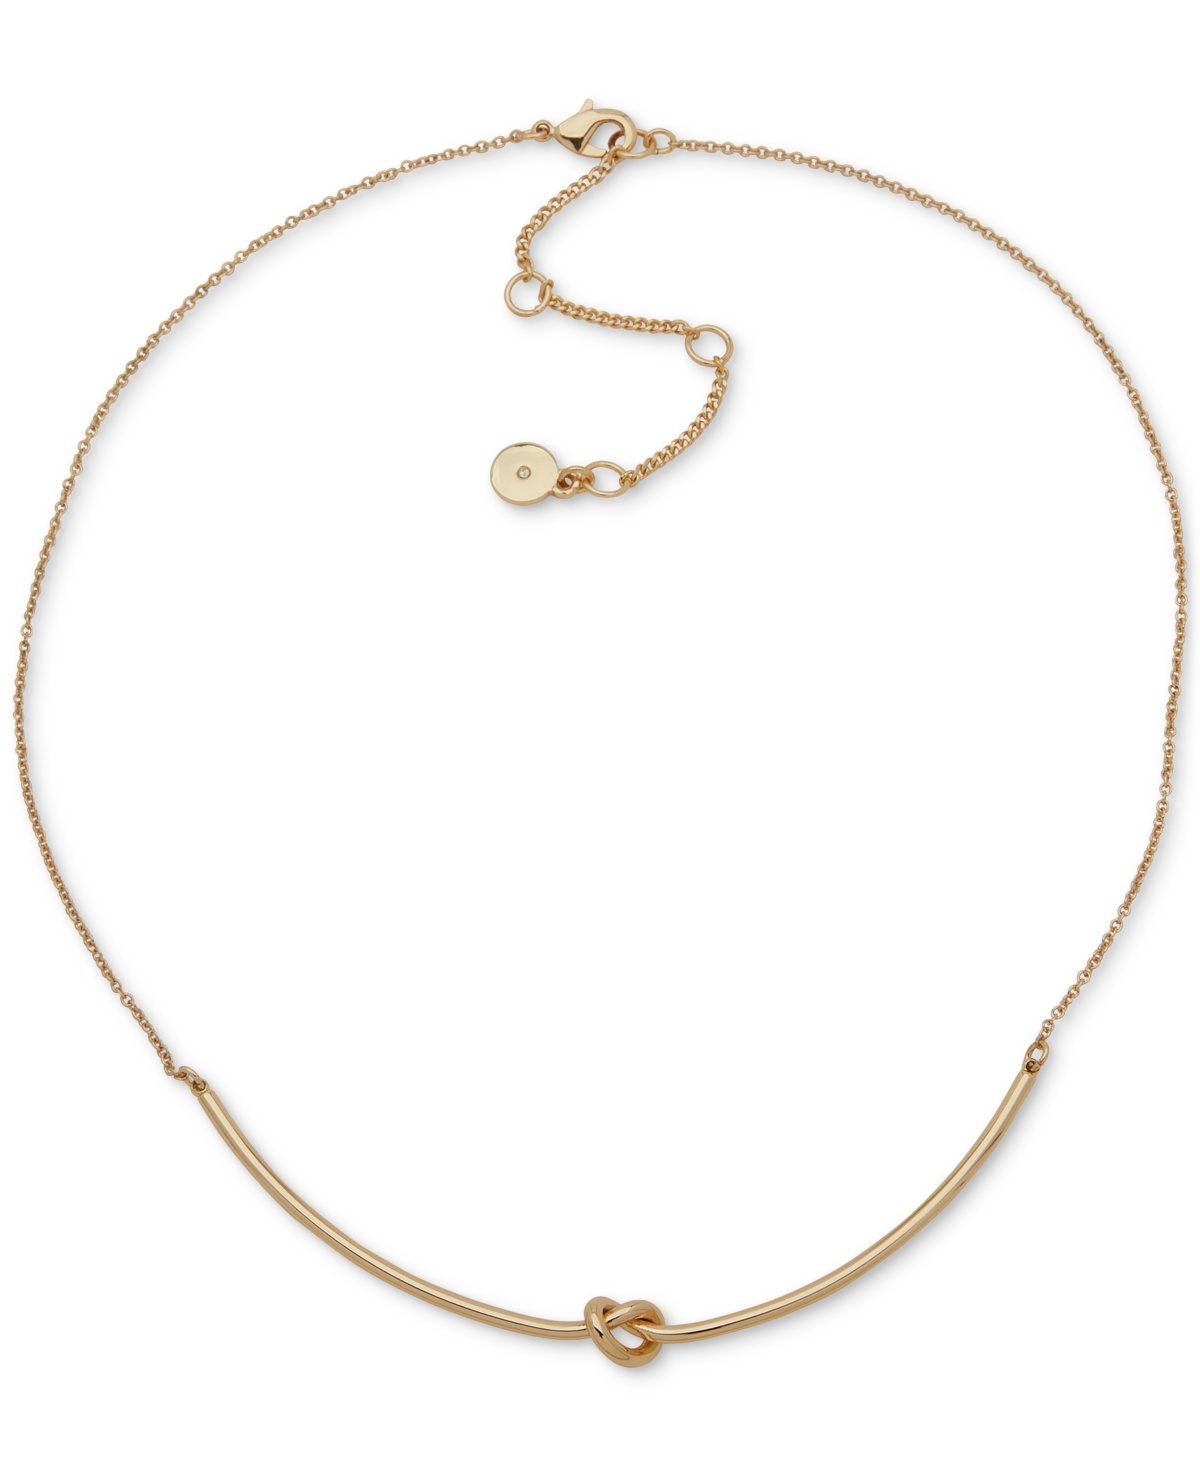 Dkny Gold-tone Knotted Bar Statement Necklace, 16" + 3" Extender